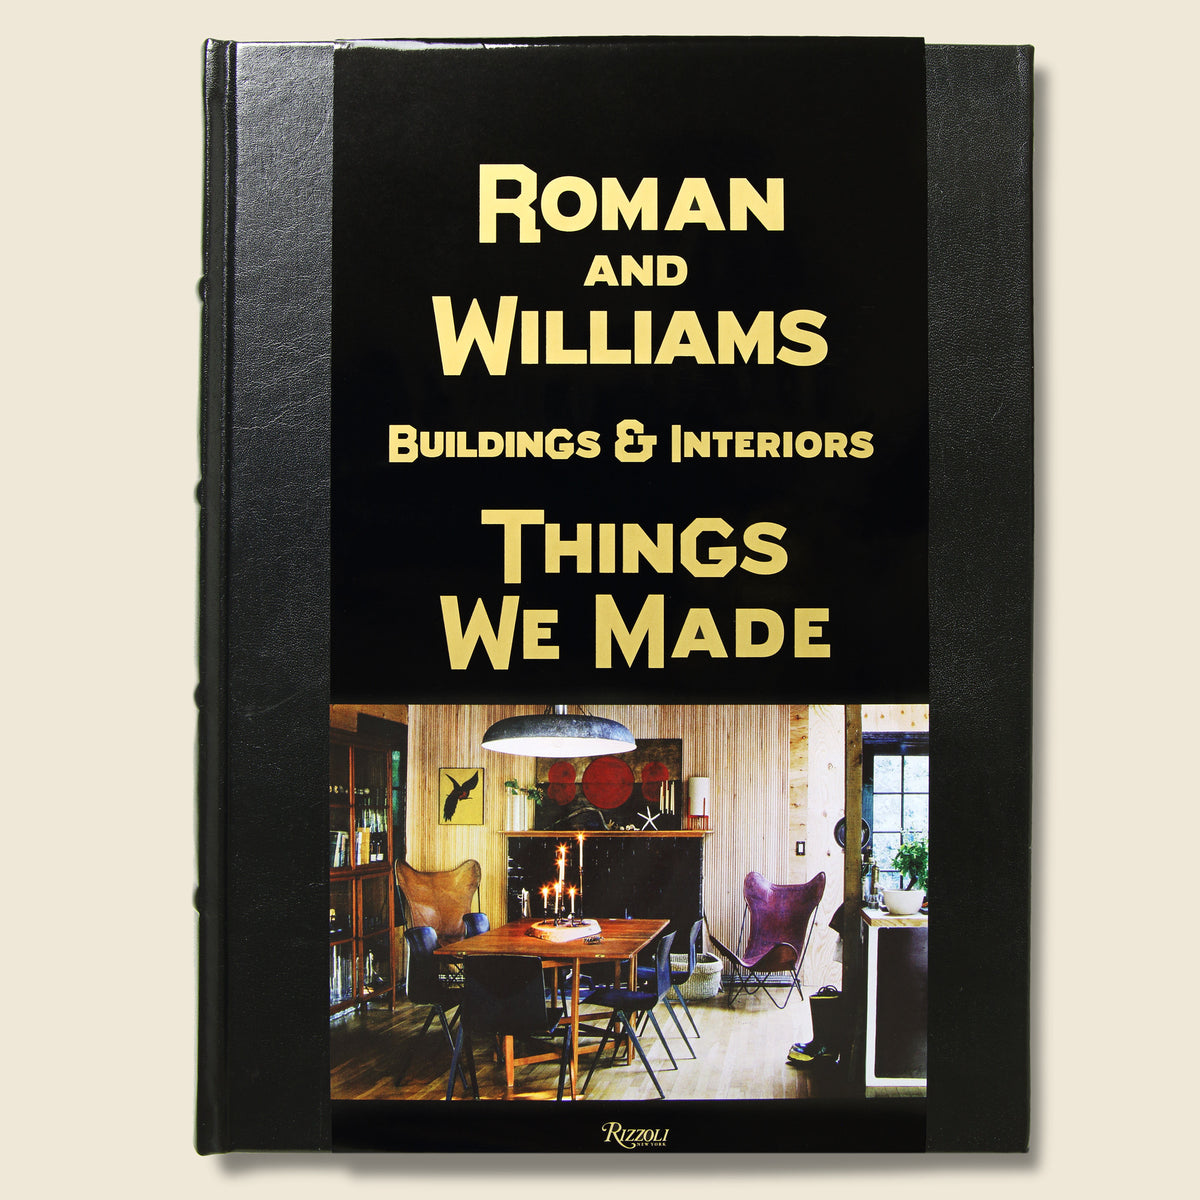 Roman and Williams - Buildings & Interiors: Things We Made